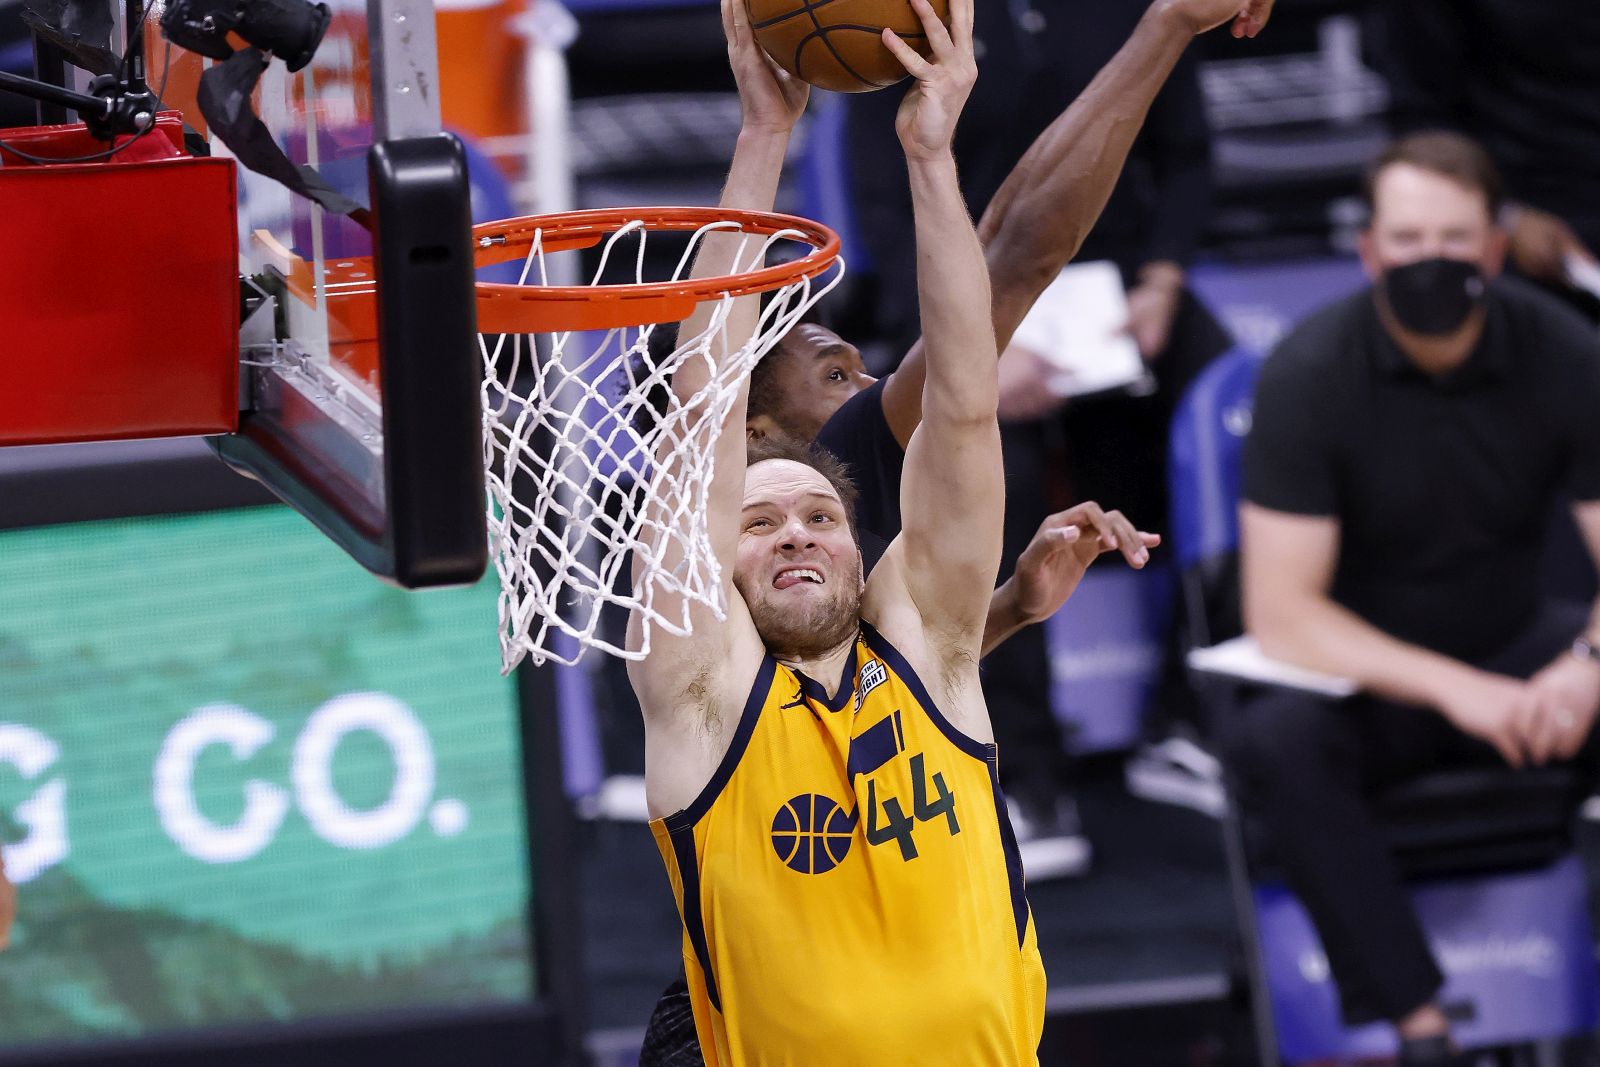 epa09166934 Utah Jazz forward Bojan Bogdanovic of Croatia (R) goes to the basket against the Sacramento Kings during the second half of their NBA game at Golden 1 Center in Sacramento, California, USA, 28 April 2021.  EPA/JOHN G. MABANGLO SHUTTERSTOCK OUT